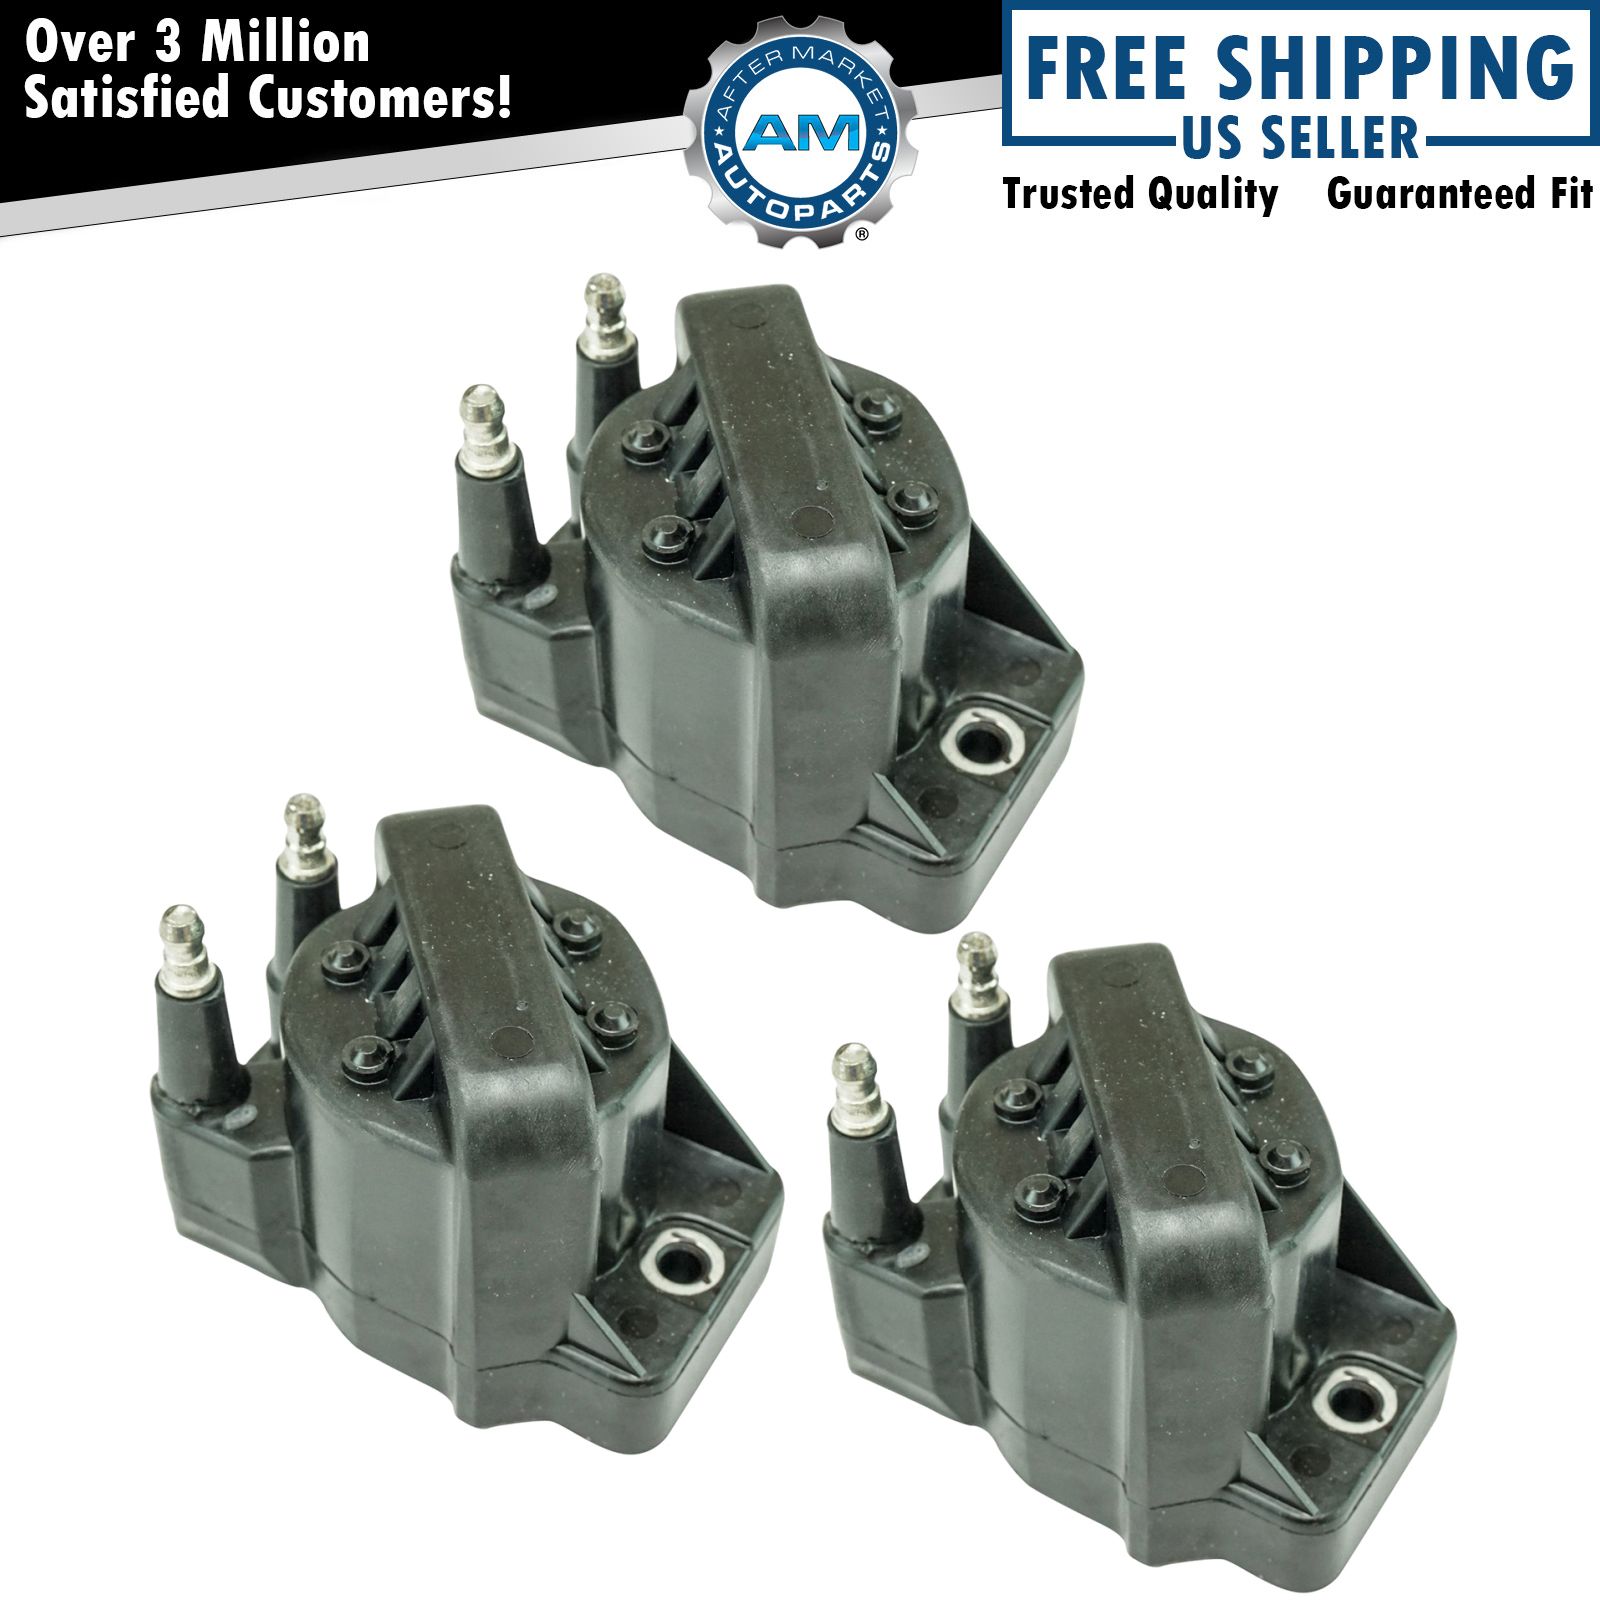 Delphi GN10123 Ignition Coil Set of 3 for Buick Cadillac Chevy GMC Olds Pontiac